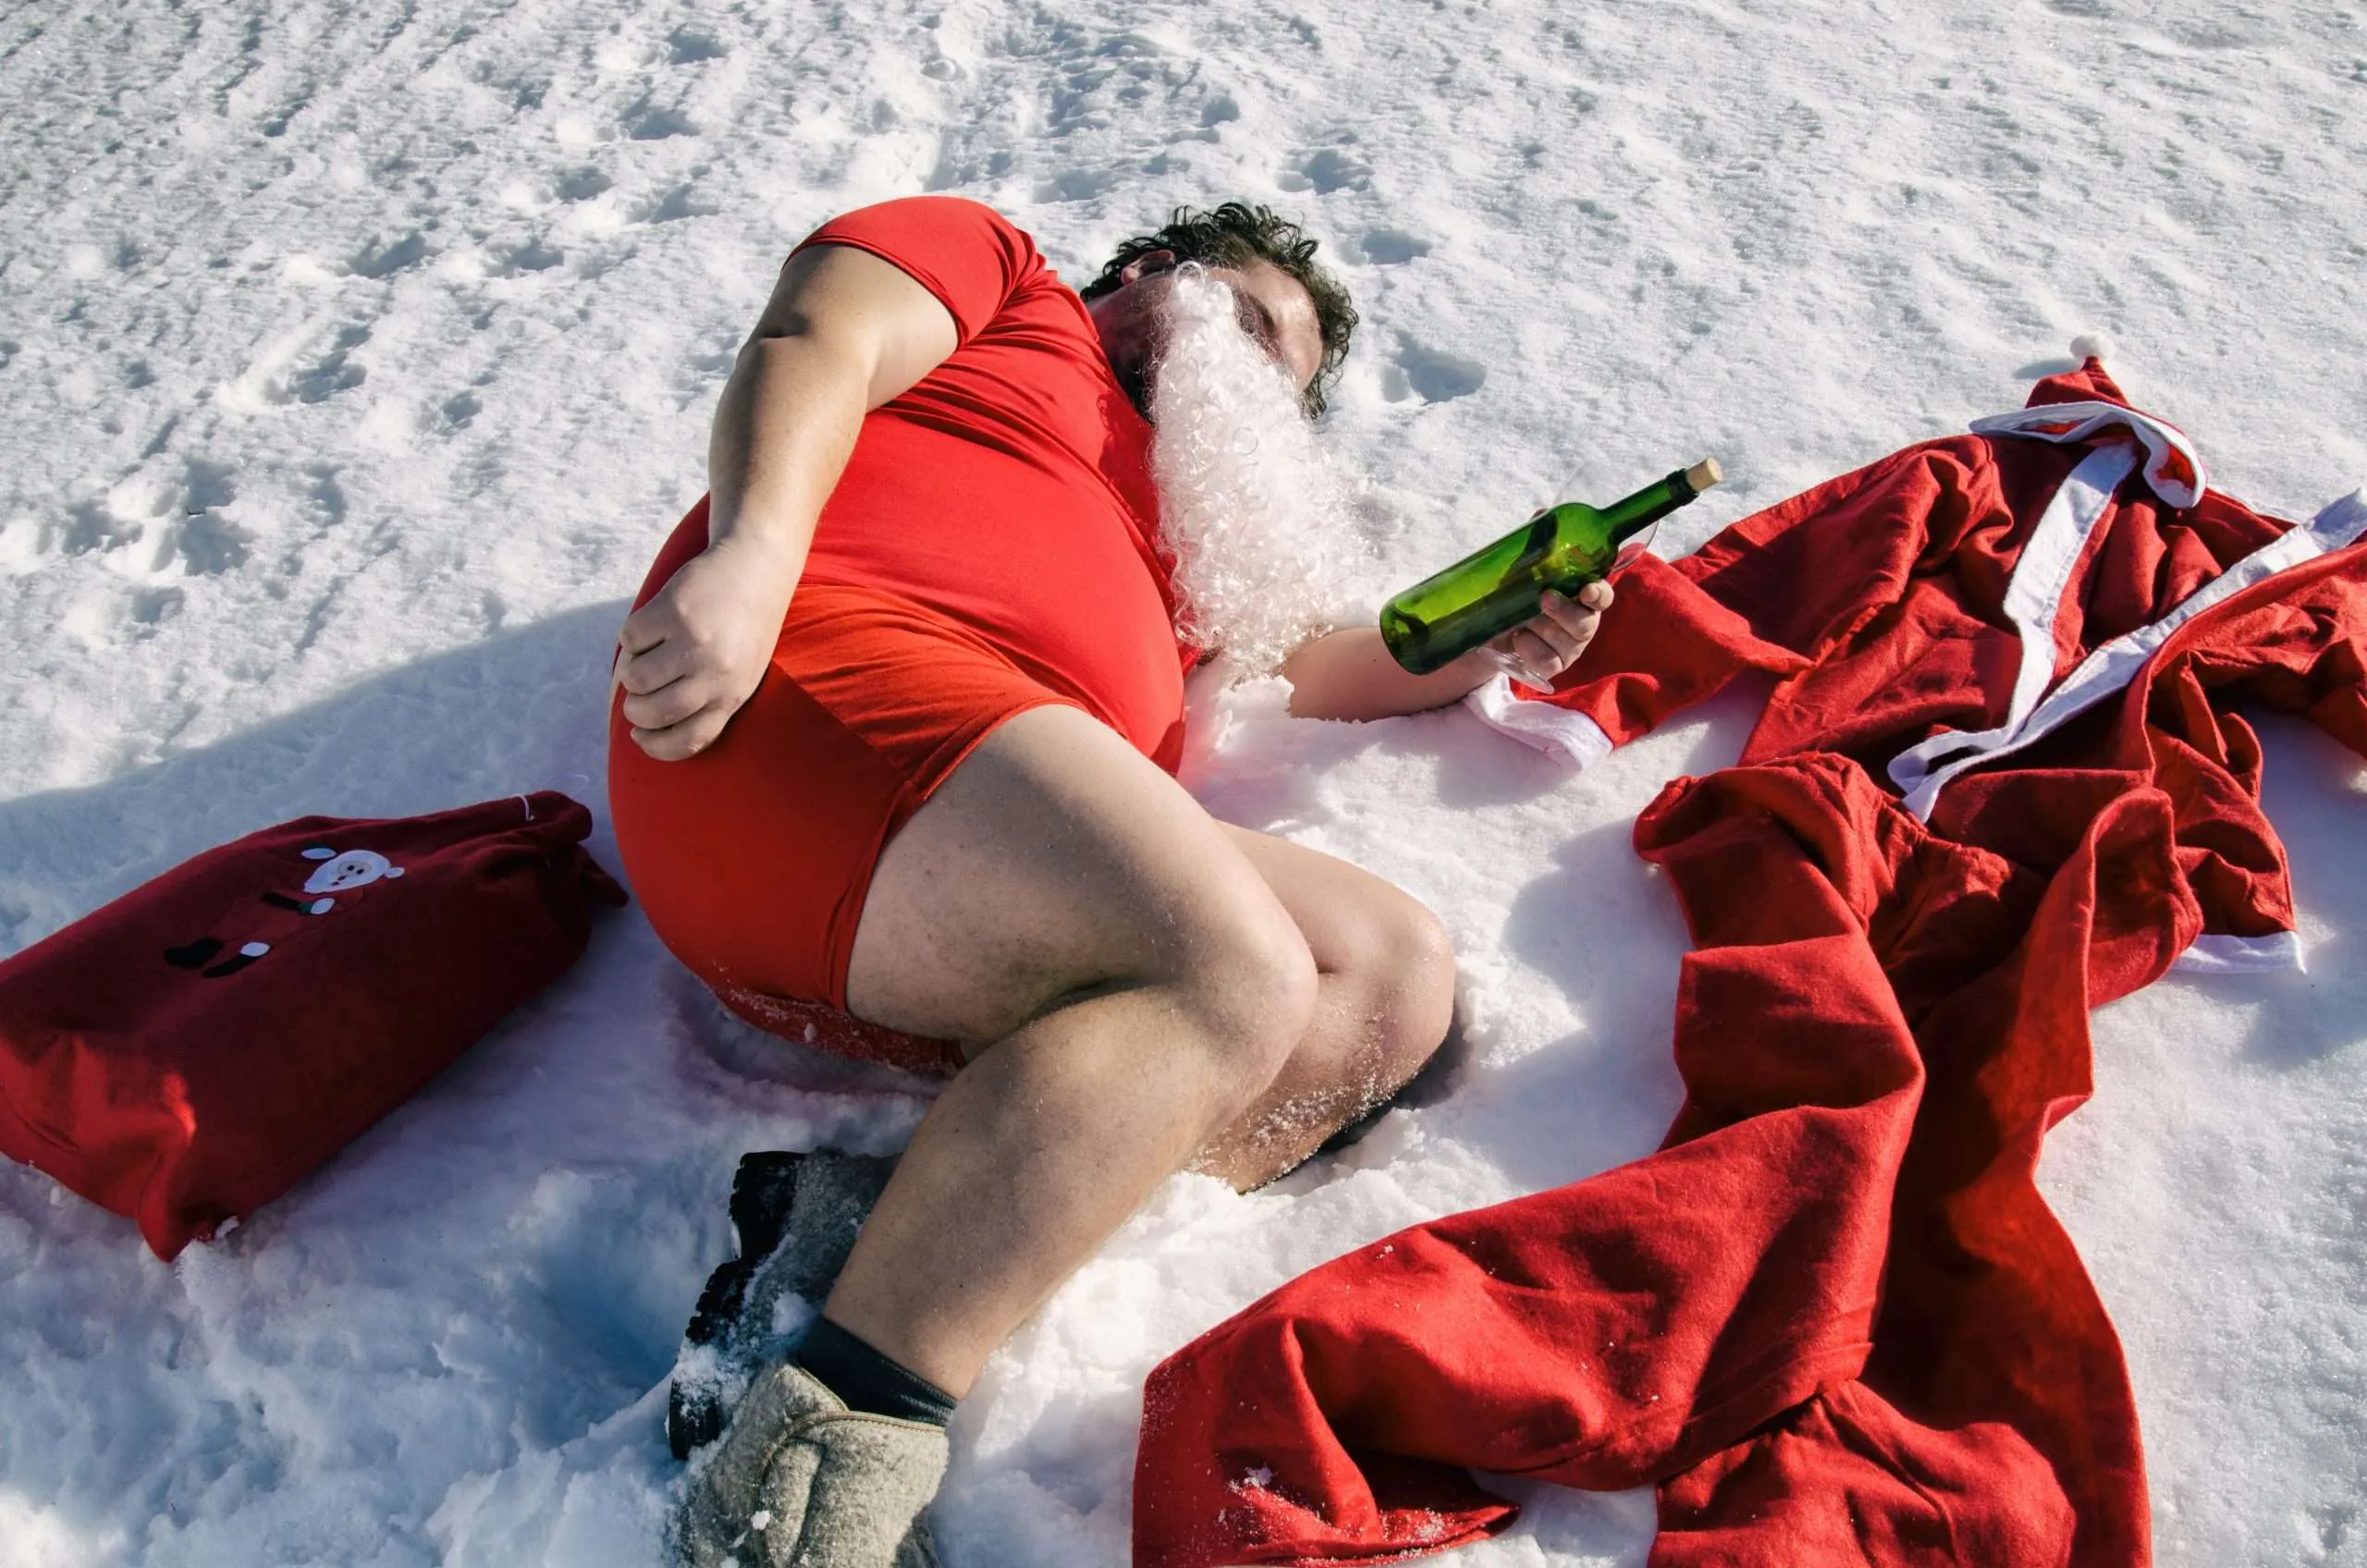 Photograph of a fake Santa Claus drunk on the ground